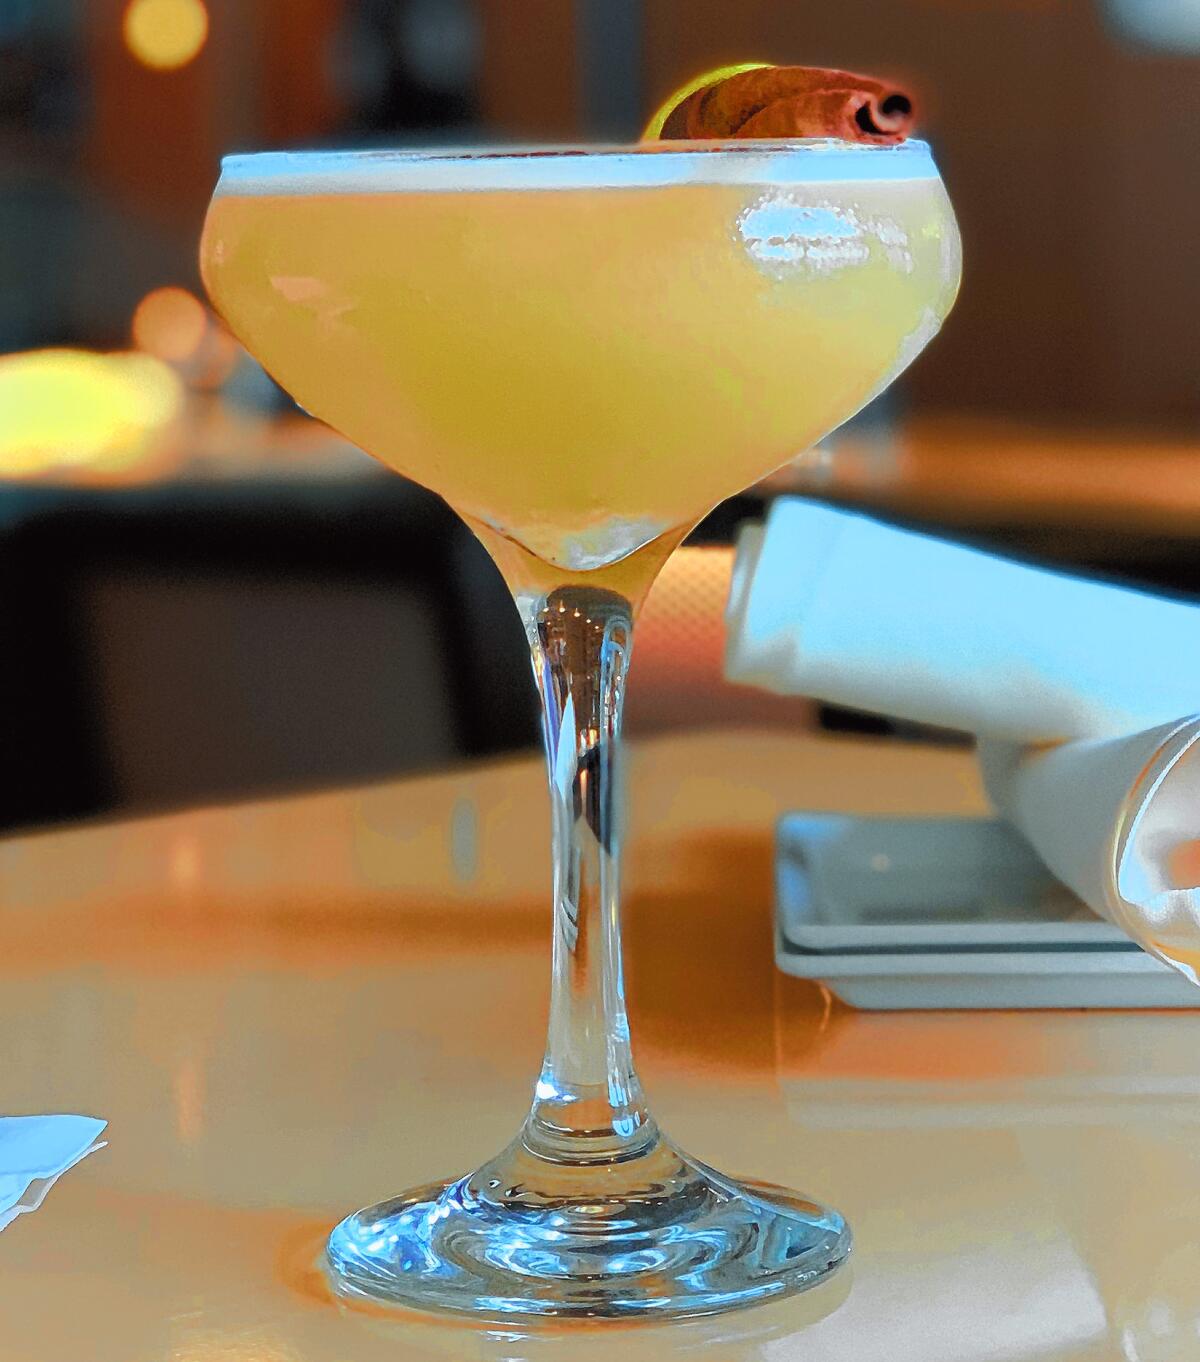 Holiday drinks at NINE-TEN restaurant and bar in La Jolla include the Spiced Pear Sour.